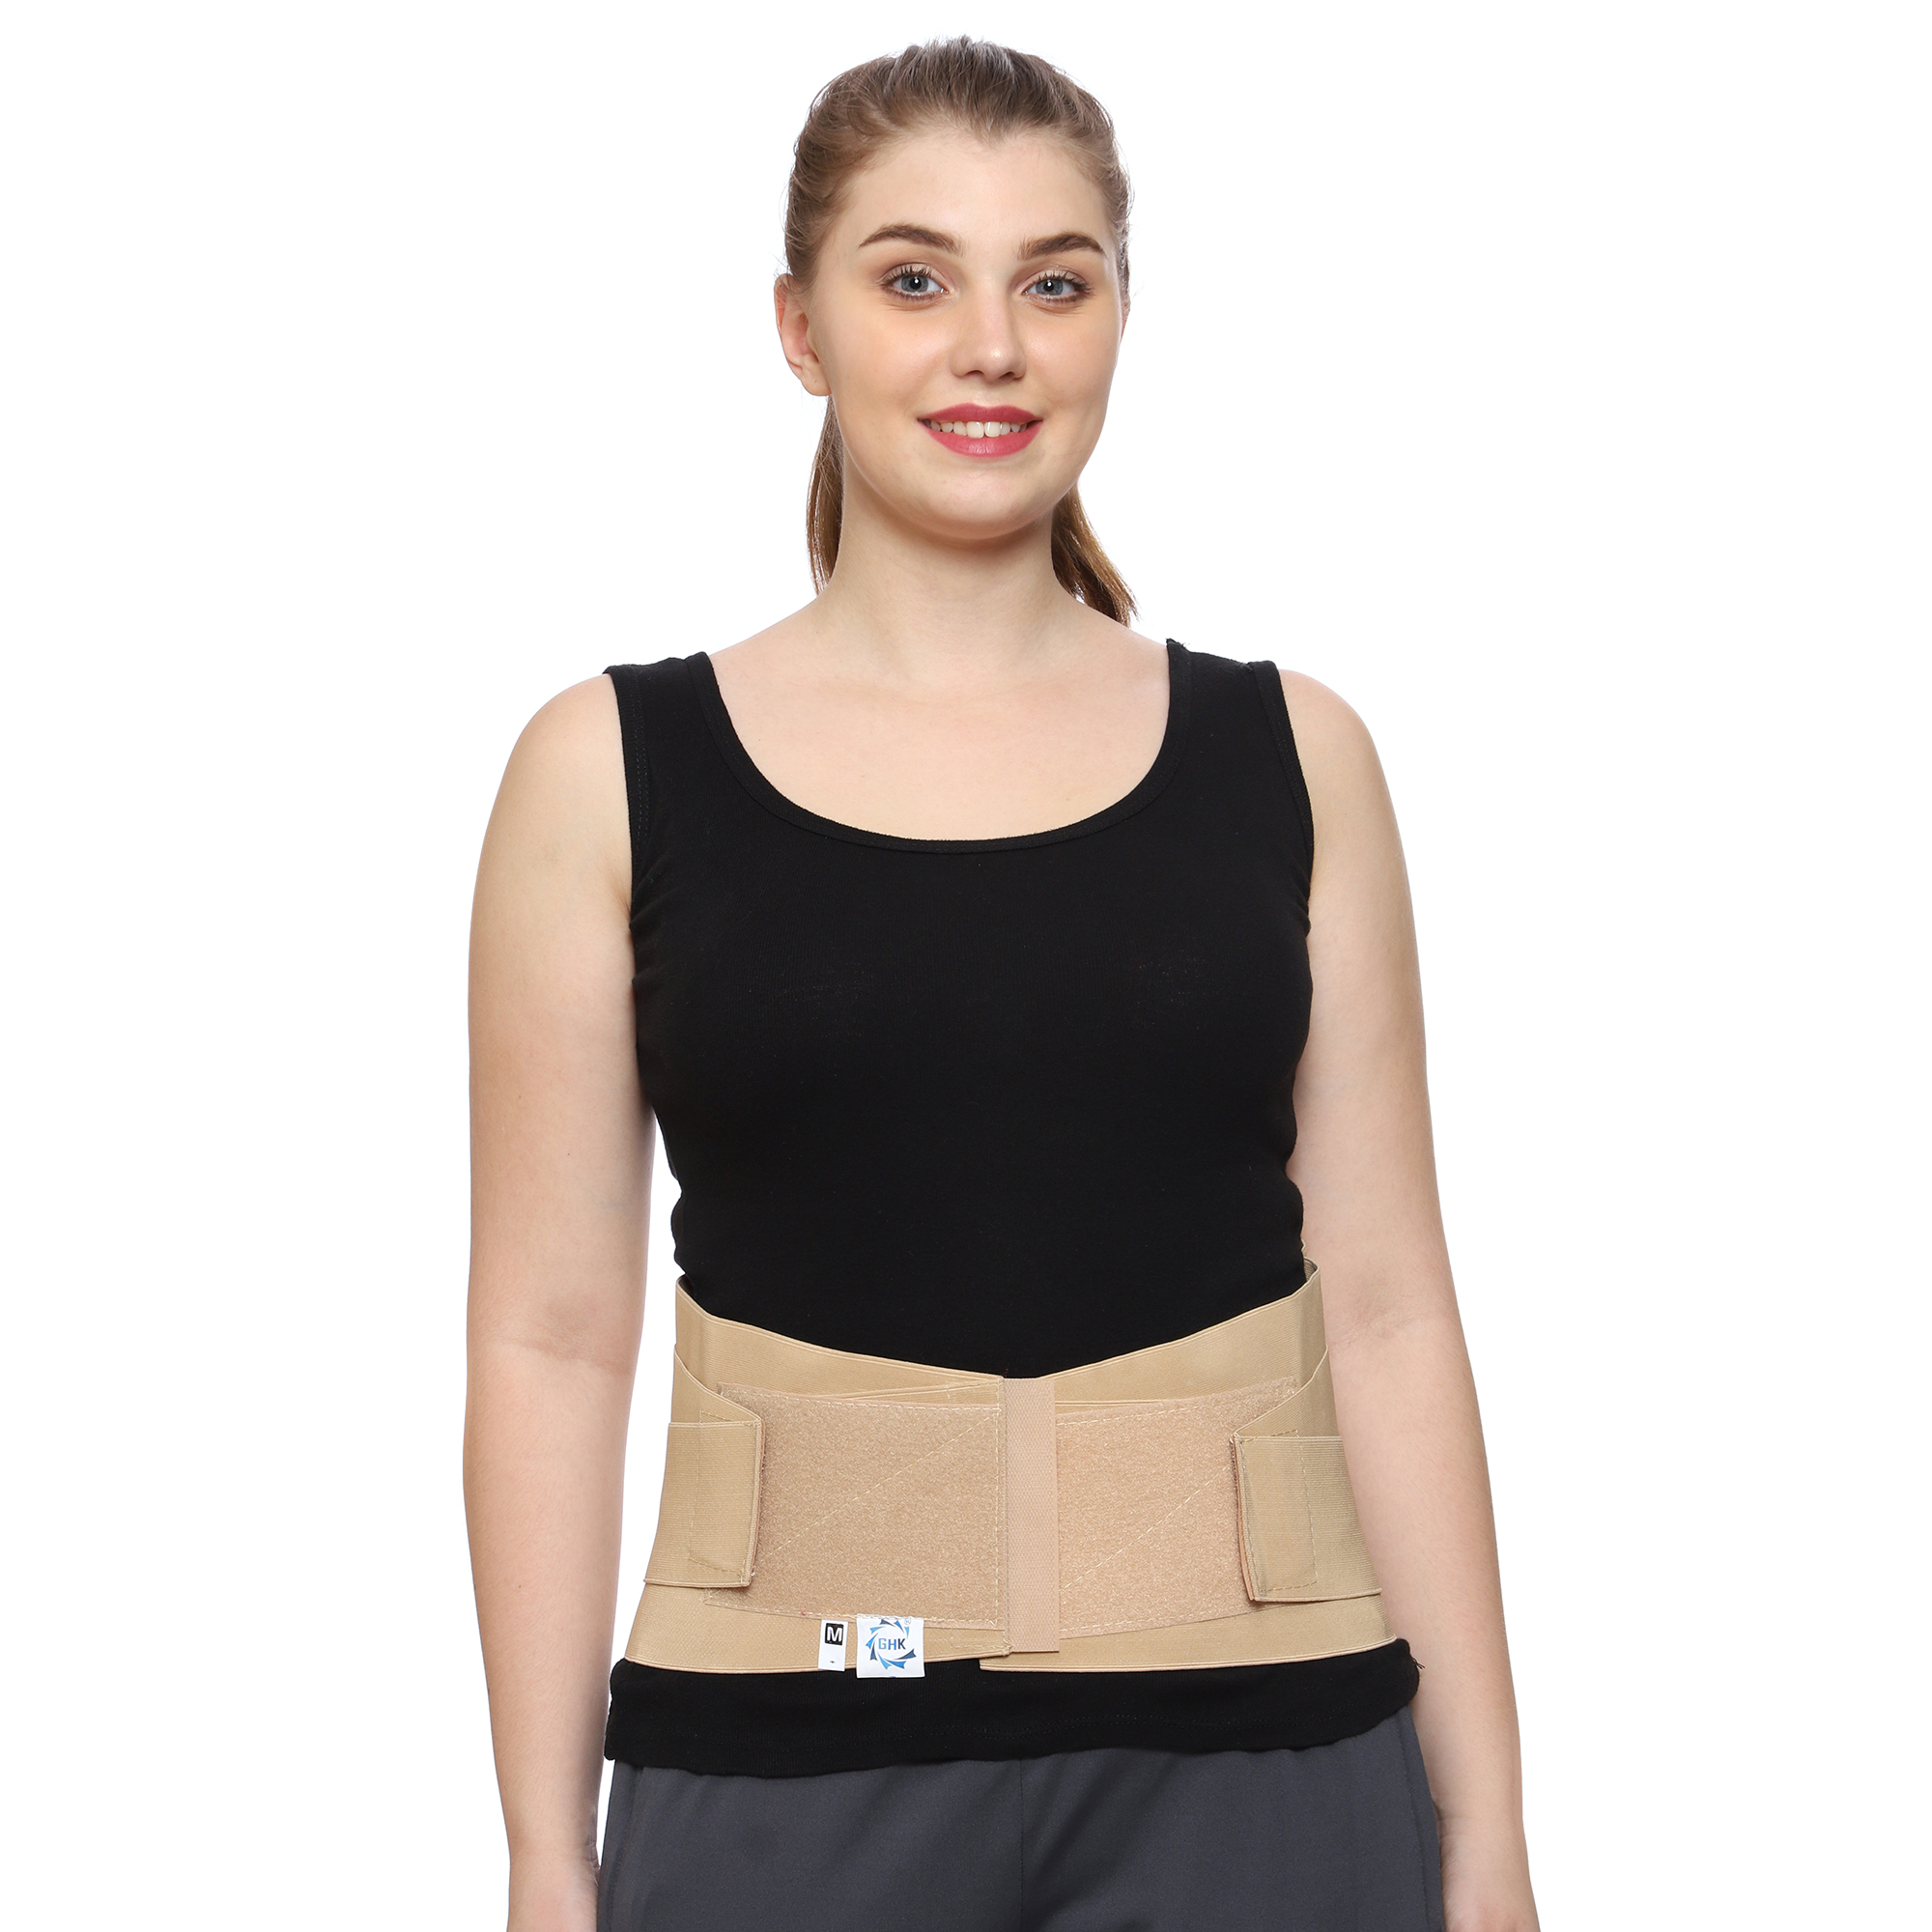 GHK S16 Contour Lumbo Sacral Support Belt for Complete Back with Double Support Elastic, Unisex, Size : S